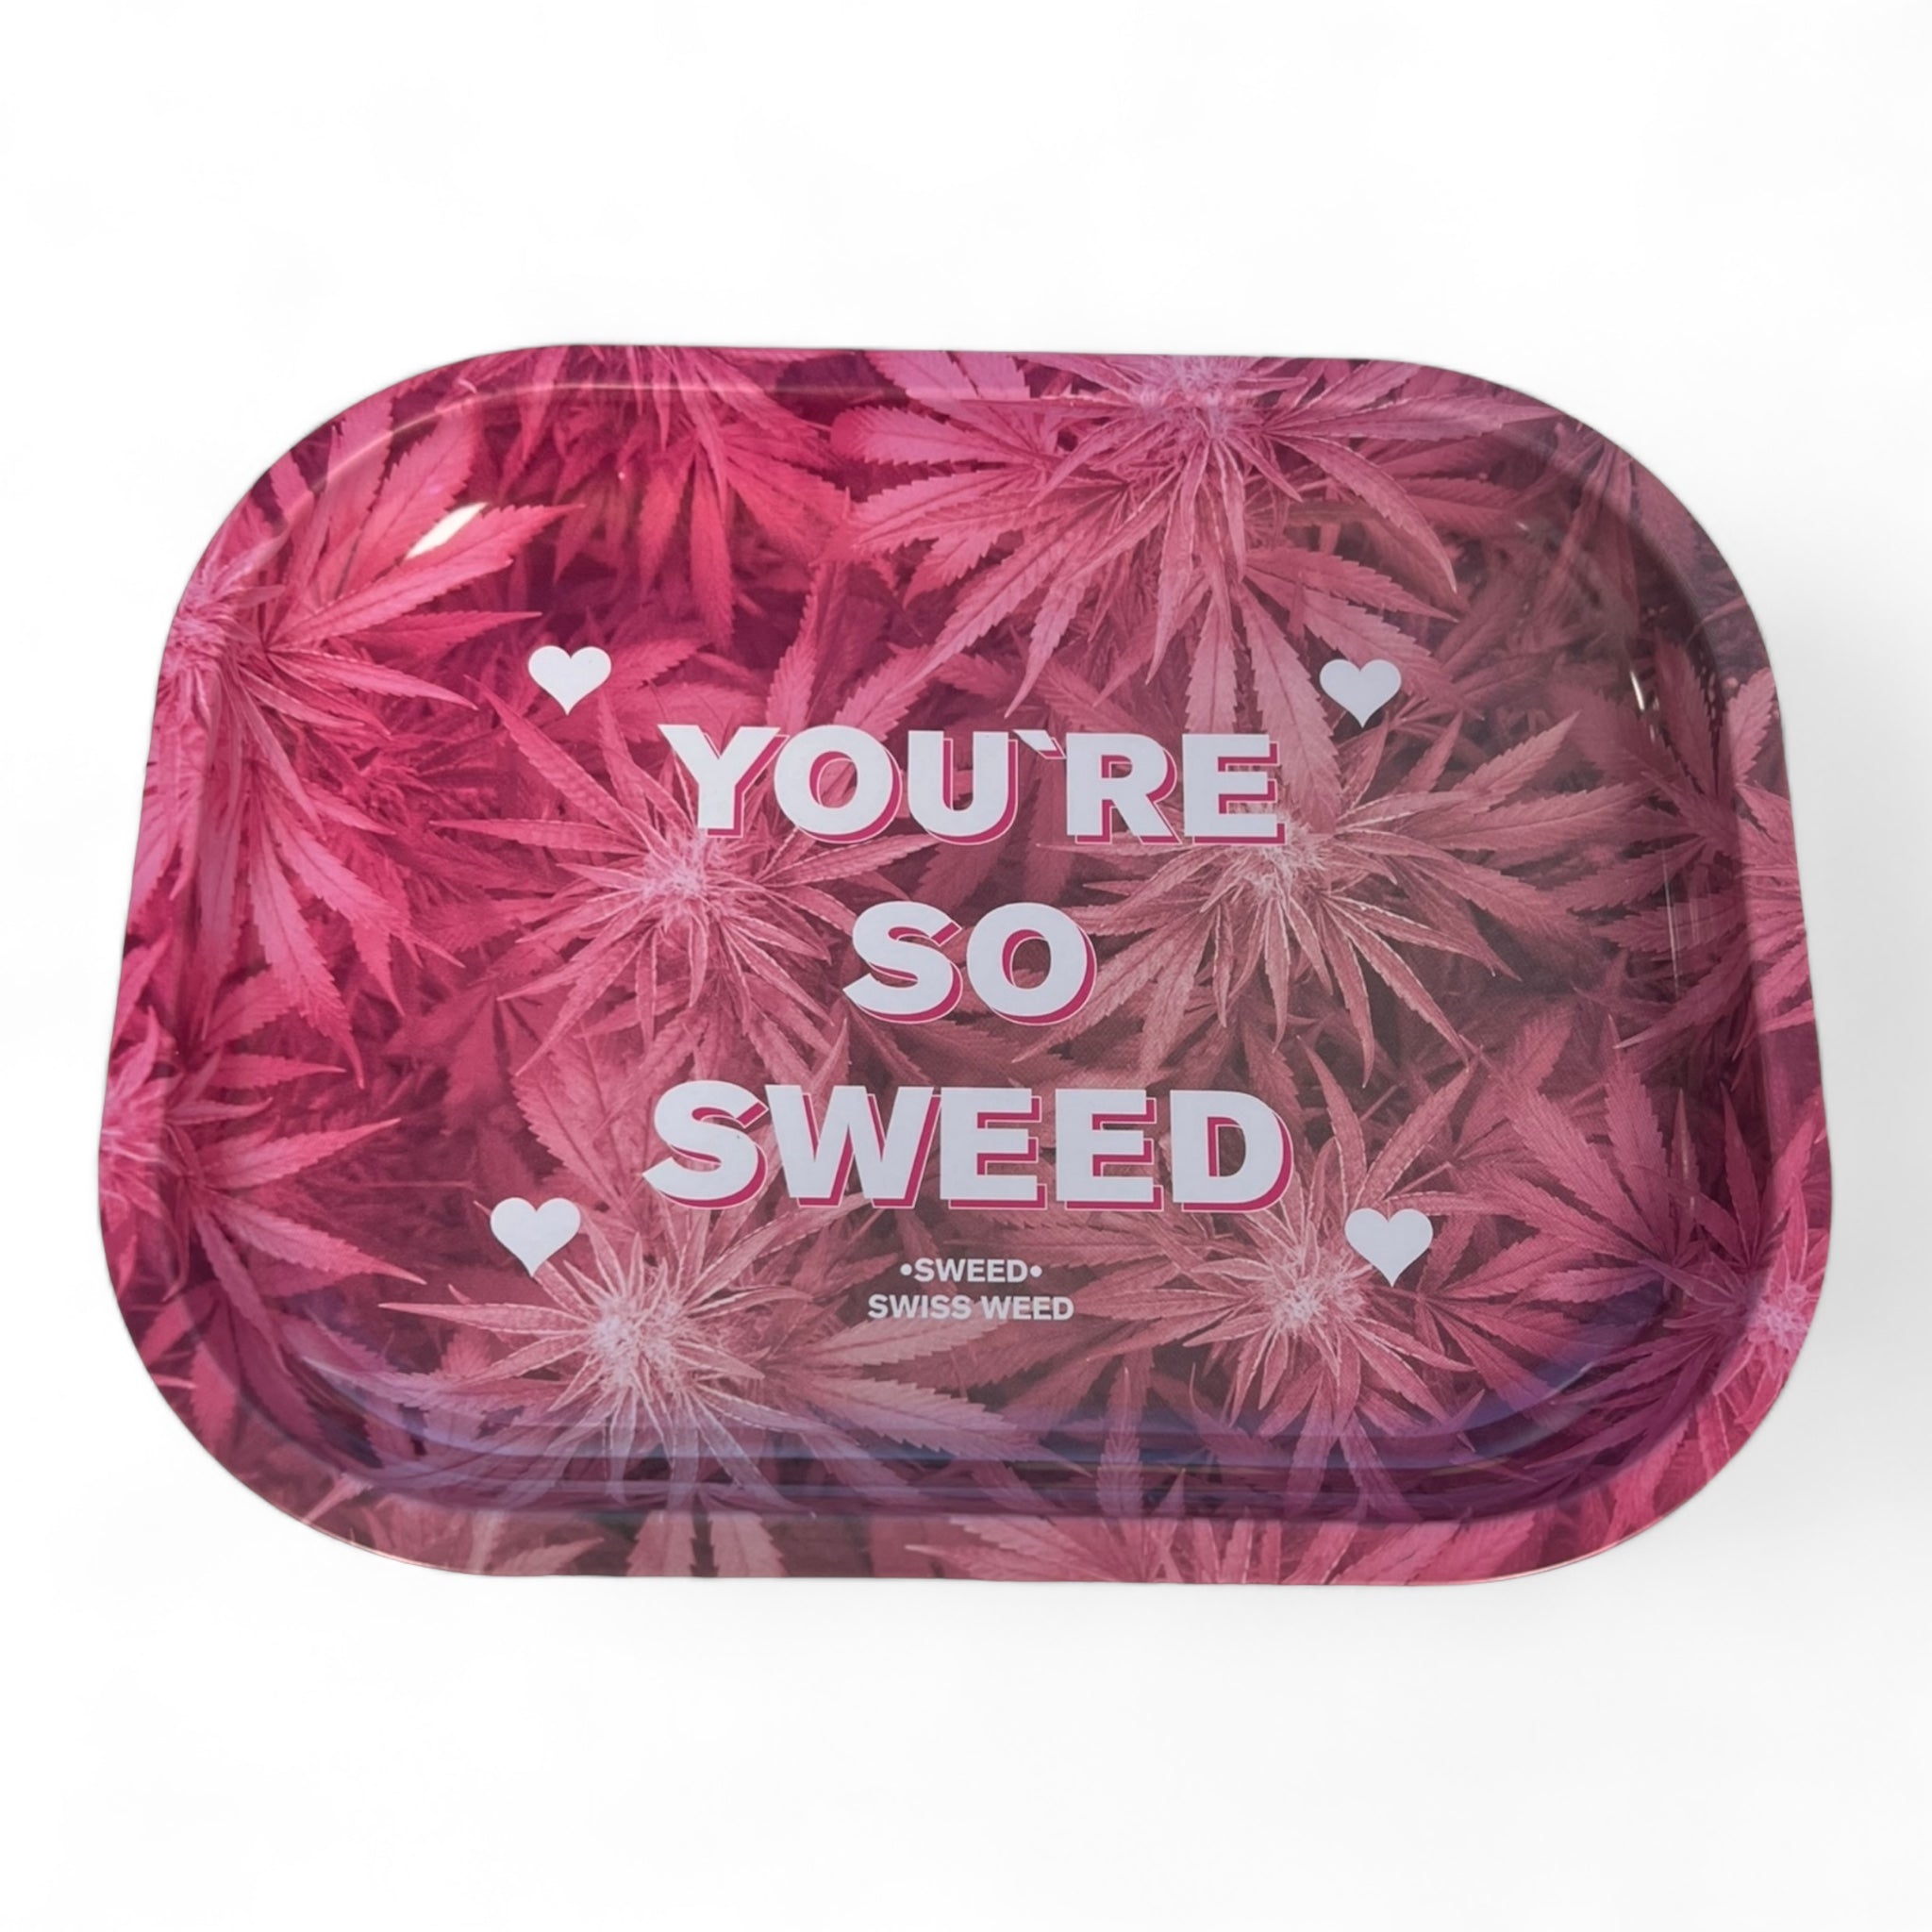 Rolling Tray 7x5.5 You're So Sweed/High Quality Premium Metal Tray